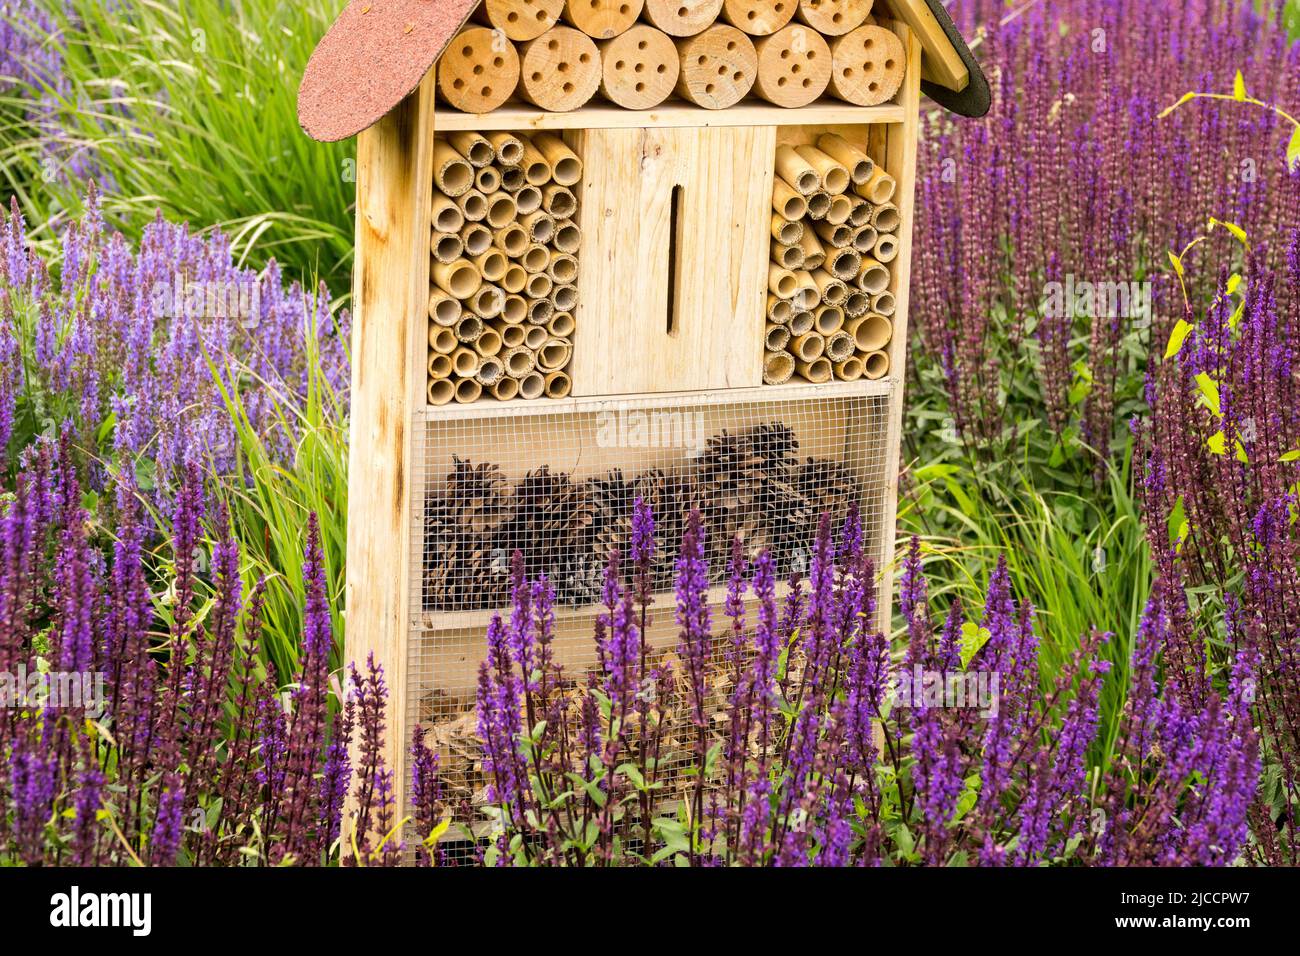 Bug hotel Bee hotel, Insect hotel, In, Garden, Refuge place for Environmentally friendly, Solitary bee, Flowers, Shelter in salvias, Bug house flowers Stock Photo